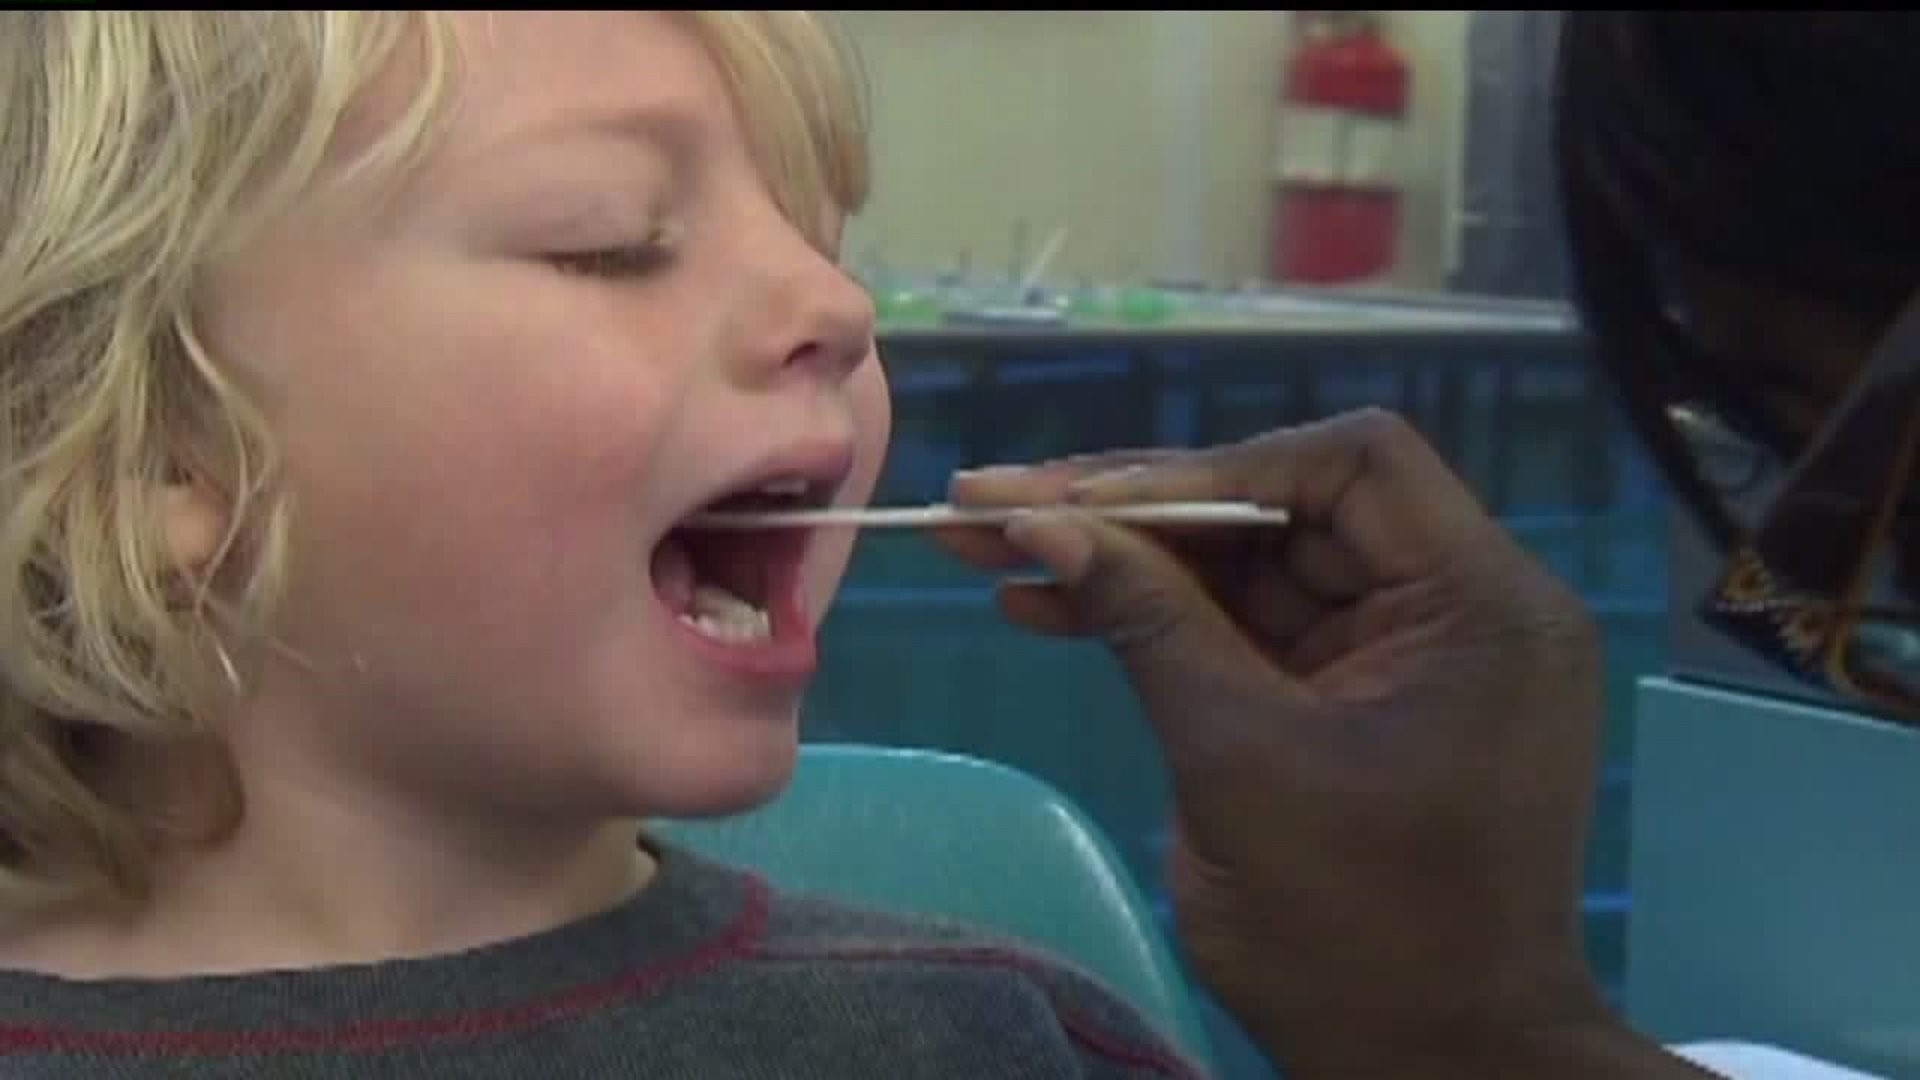 Dealing with respiratory viruses can plague children this time of year